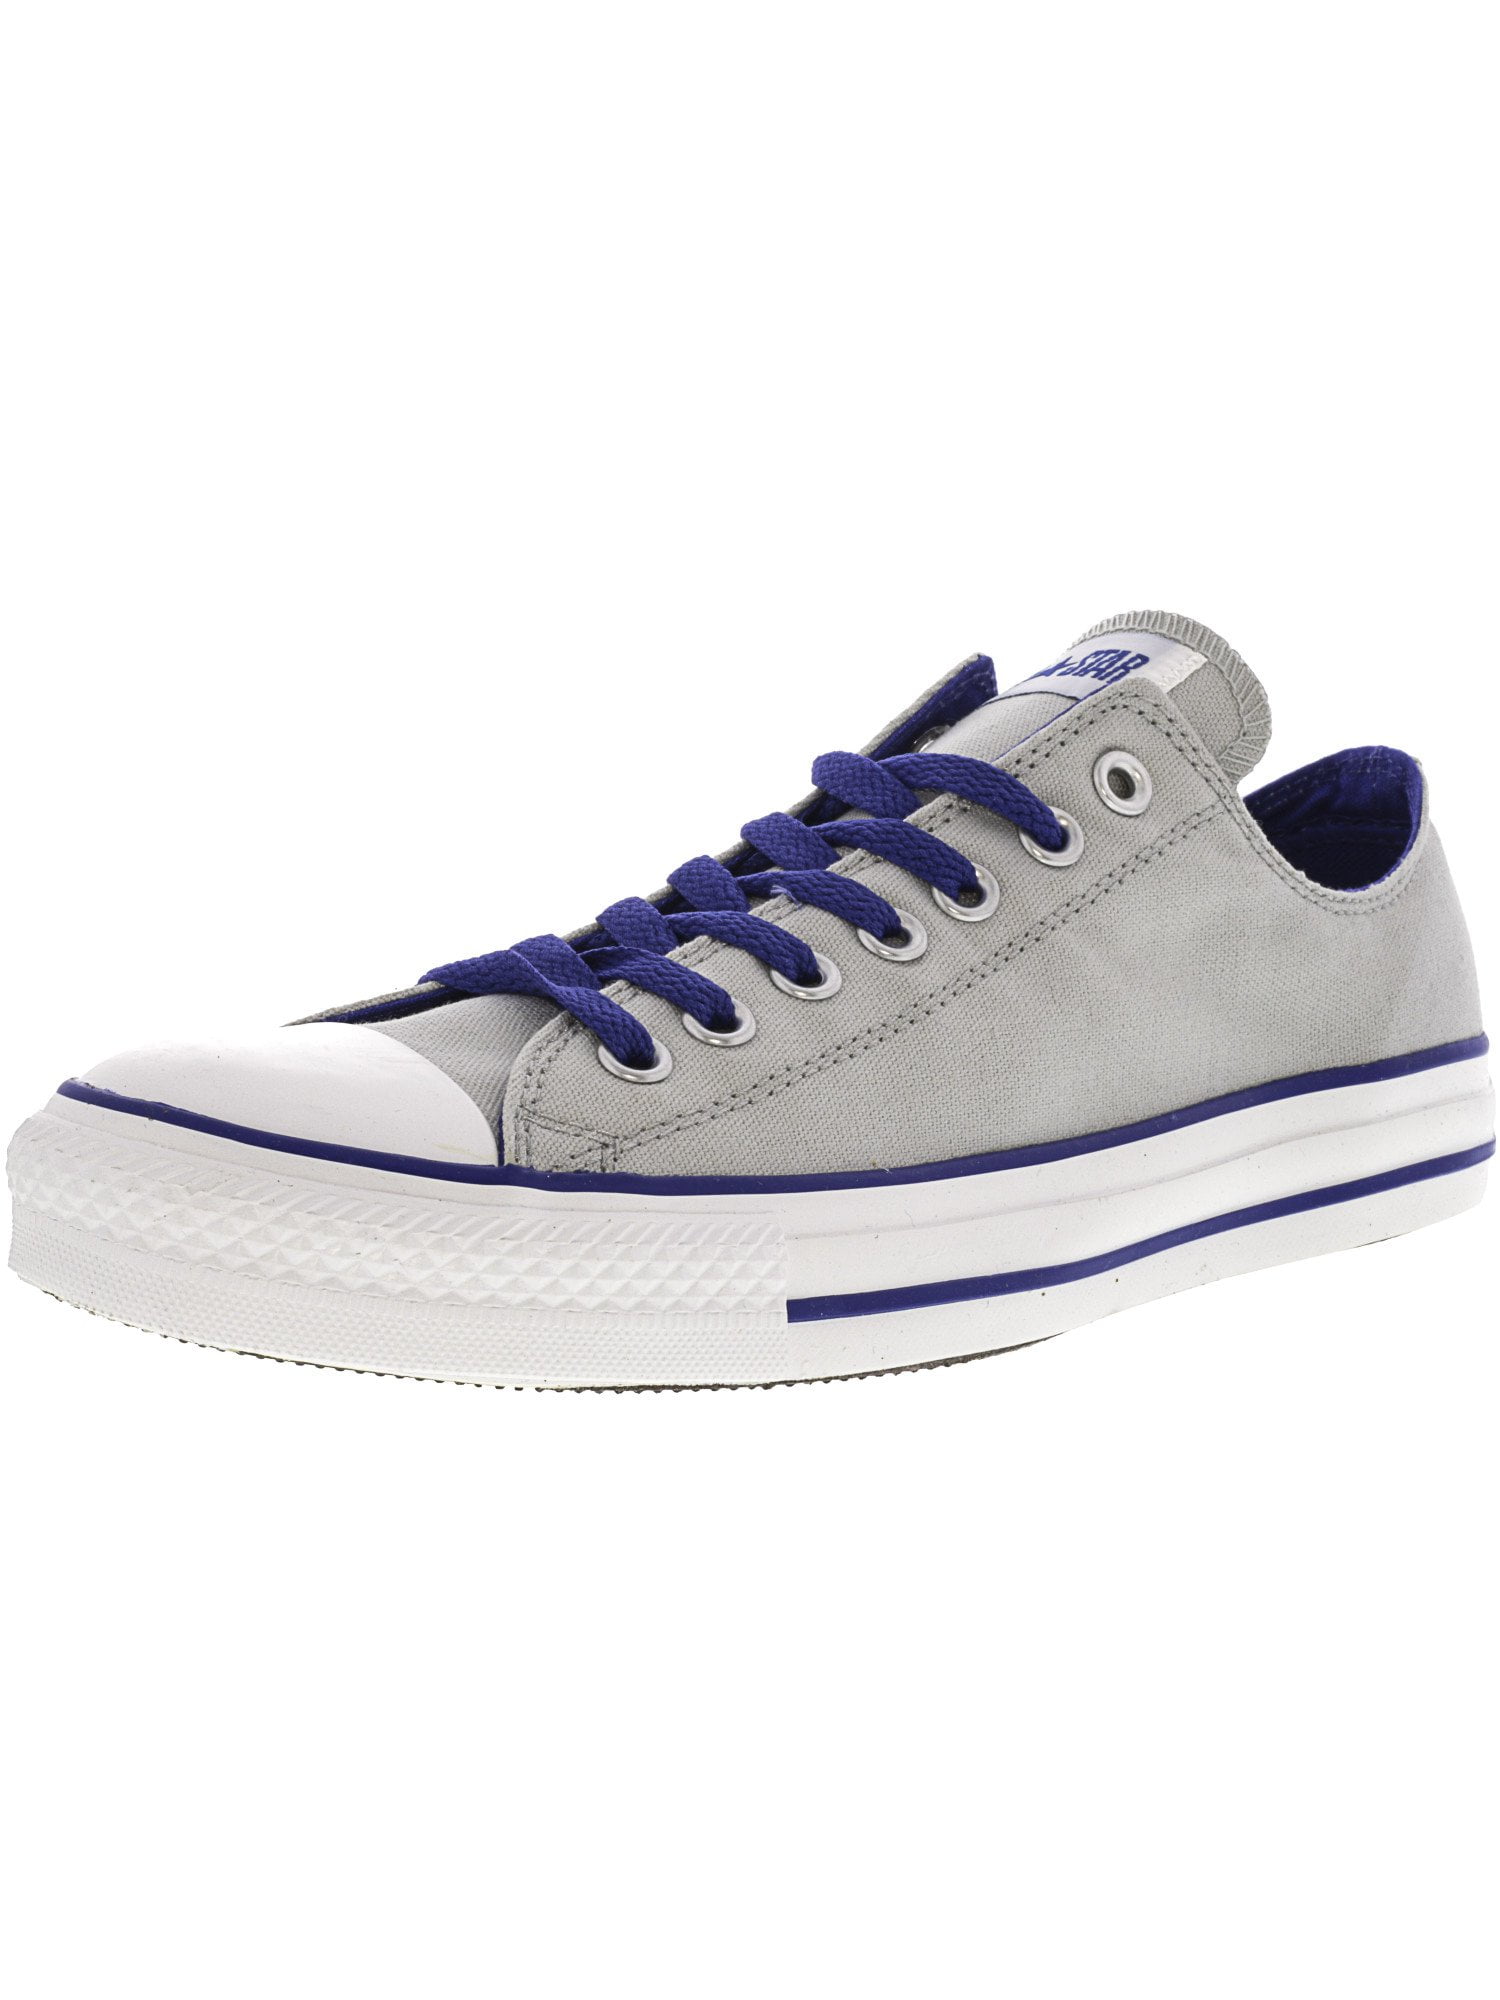 Converse Chuck Taylor All Star Ox Cloud Gray / Blue Ankle-High Fashion  Sneaker - 9M 7M 